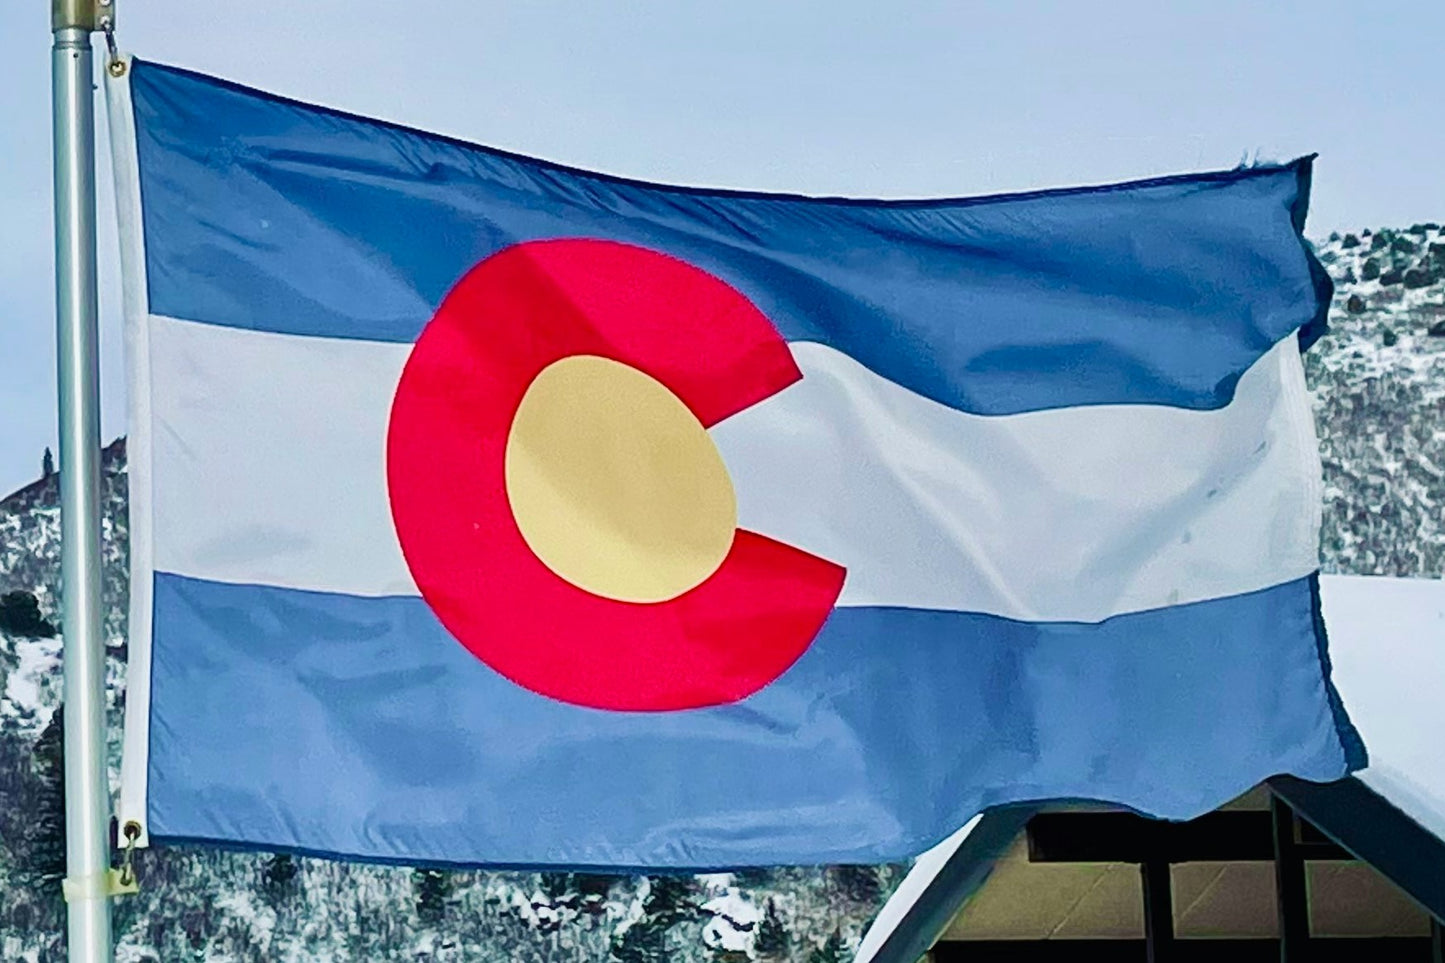 The flag of Colorado flying from a flagpole.